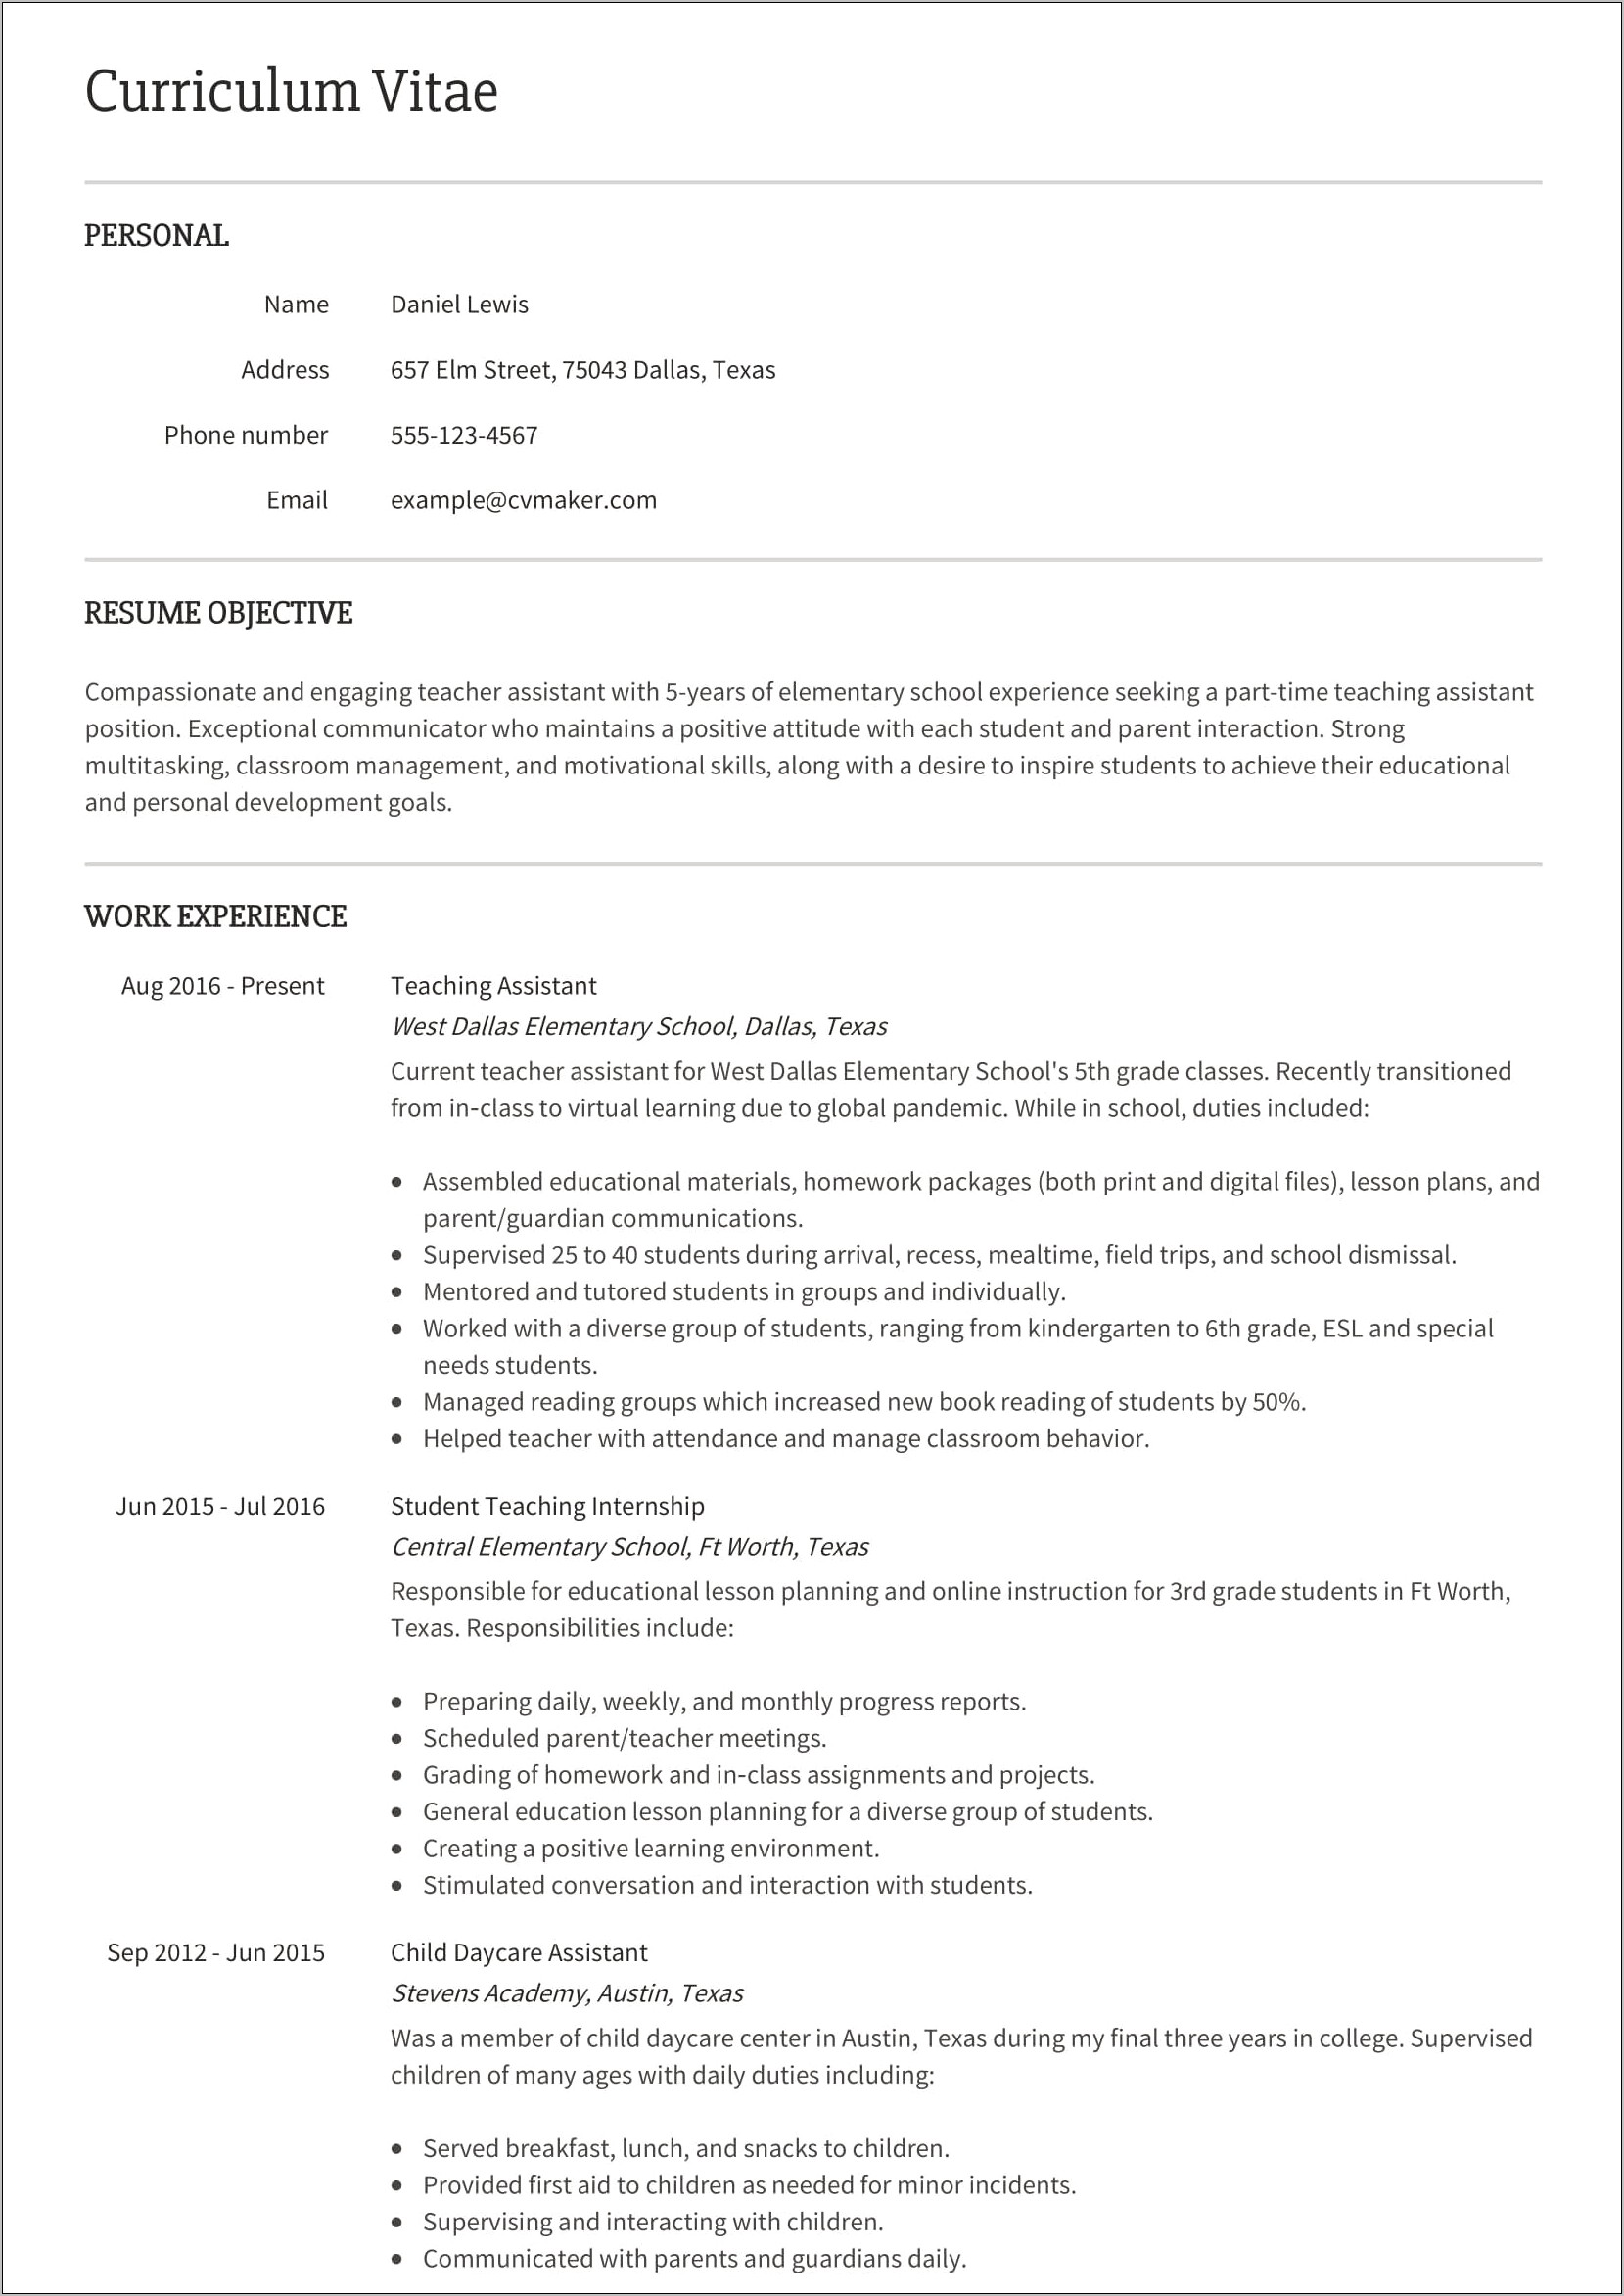 Resume Objectives For Teachers Aide